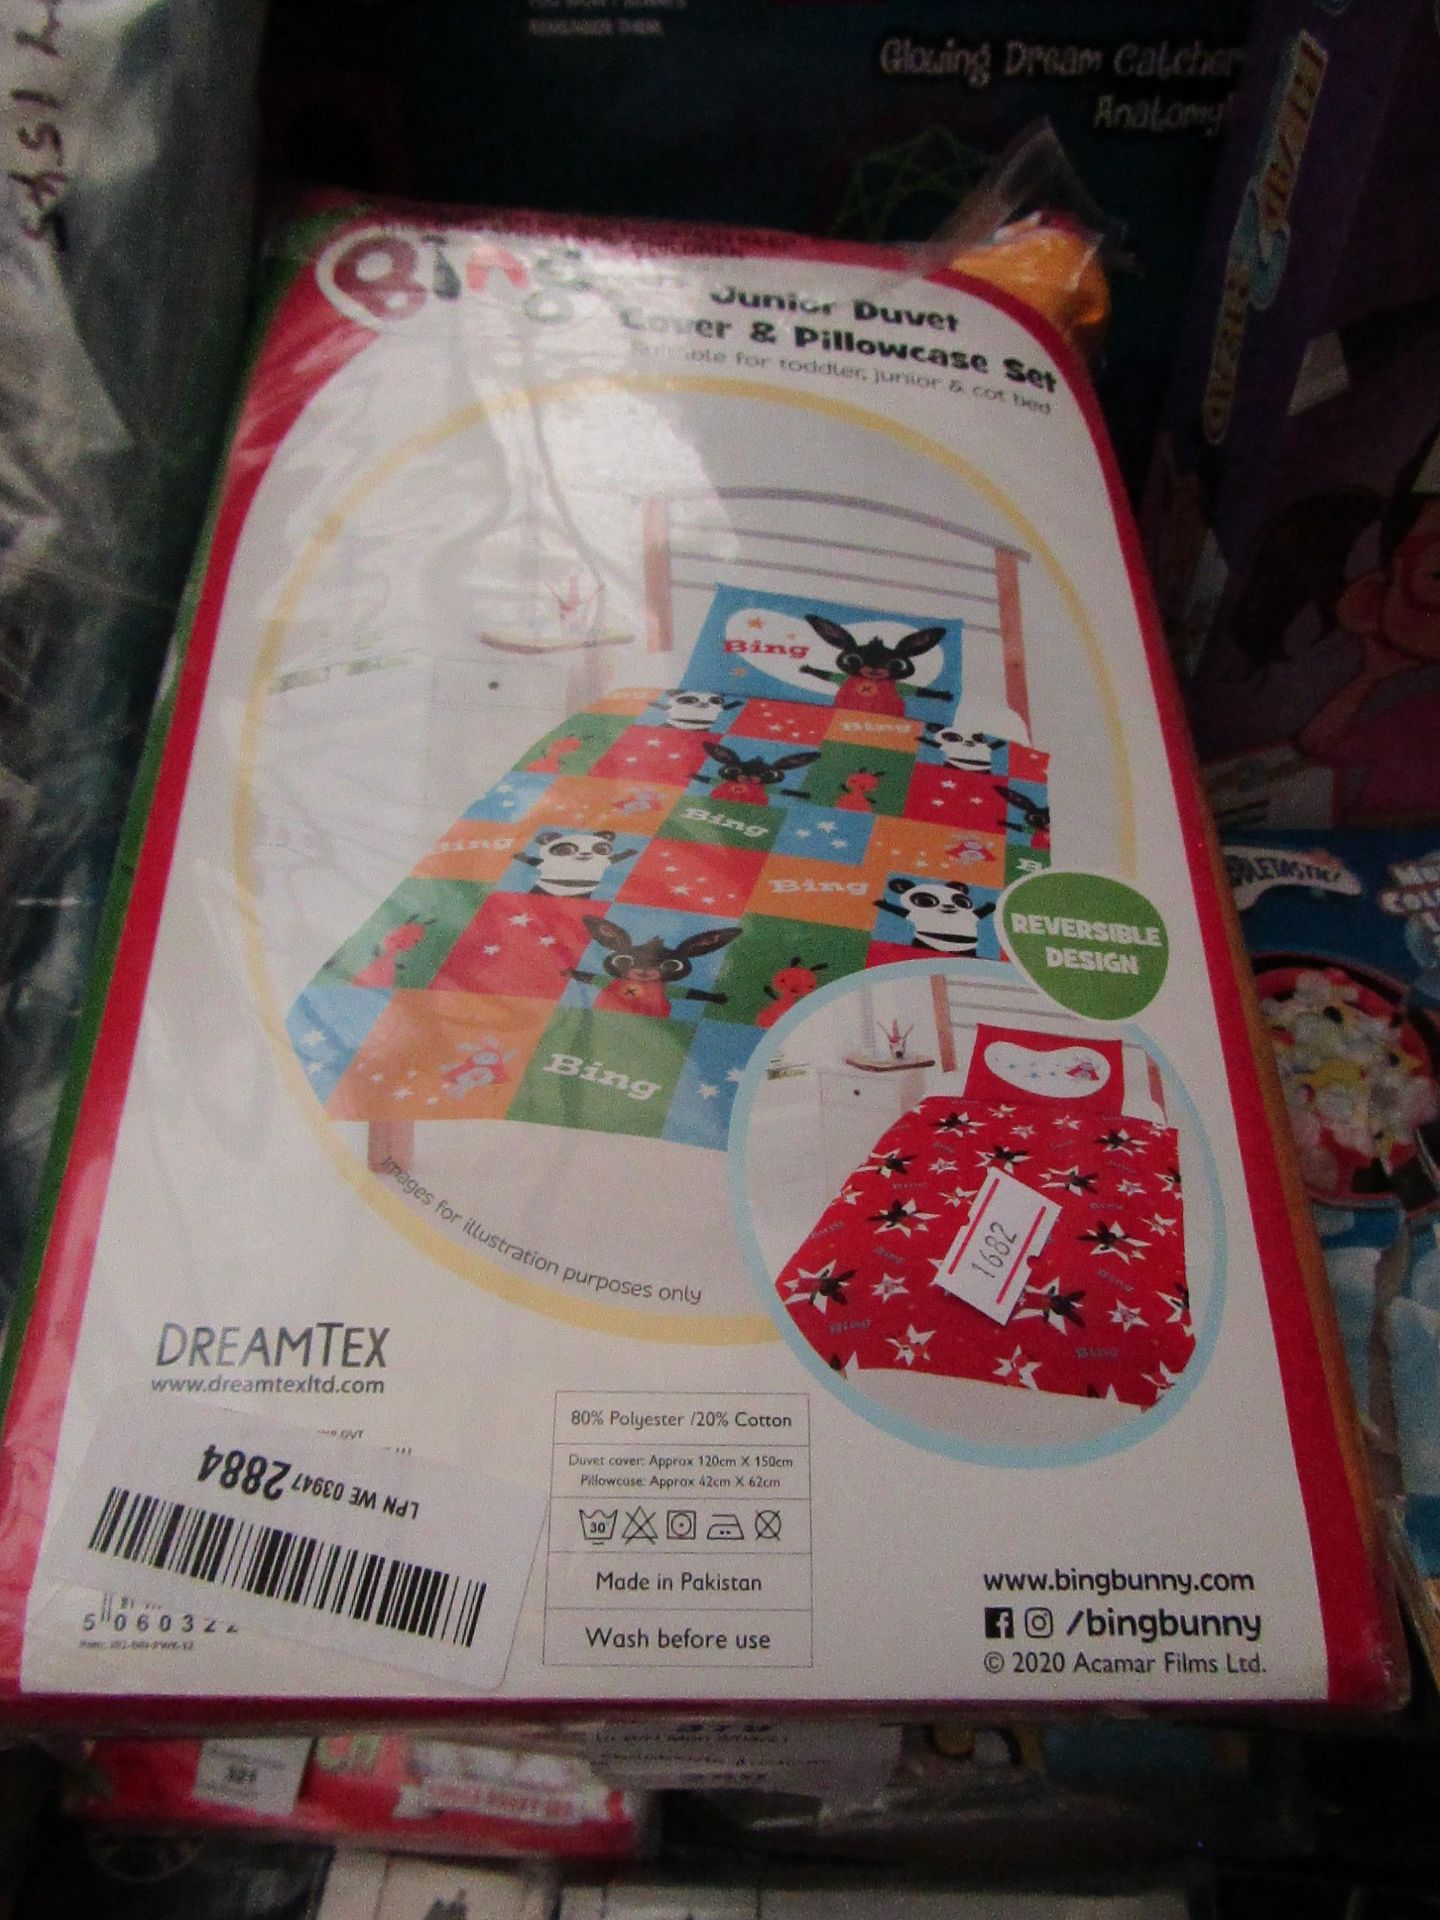 bing Junior Duvet cover and pillow case set, suitable for Cot Beds etc.